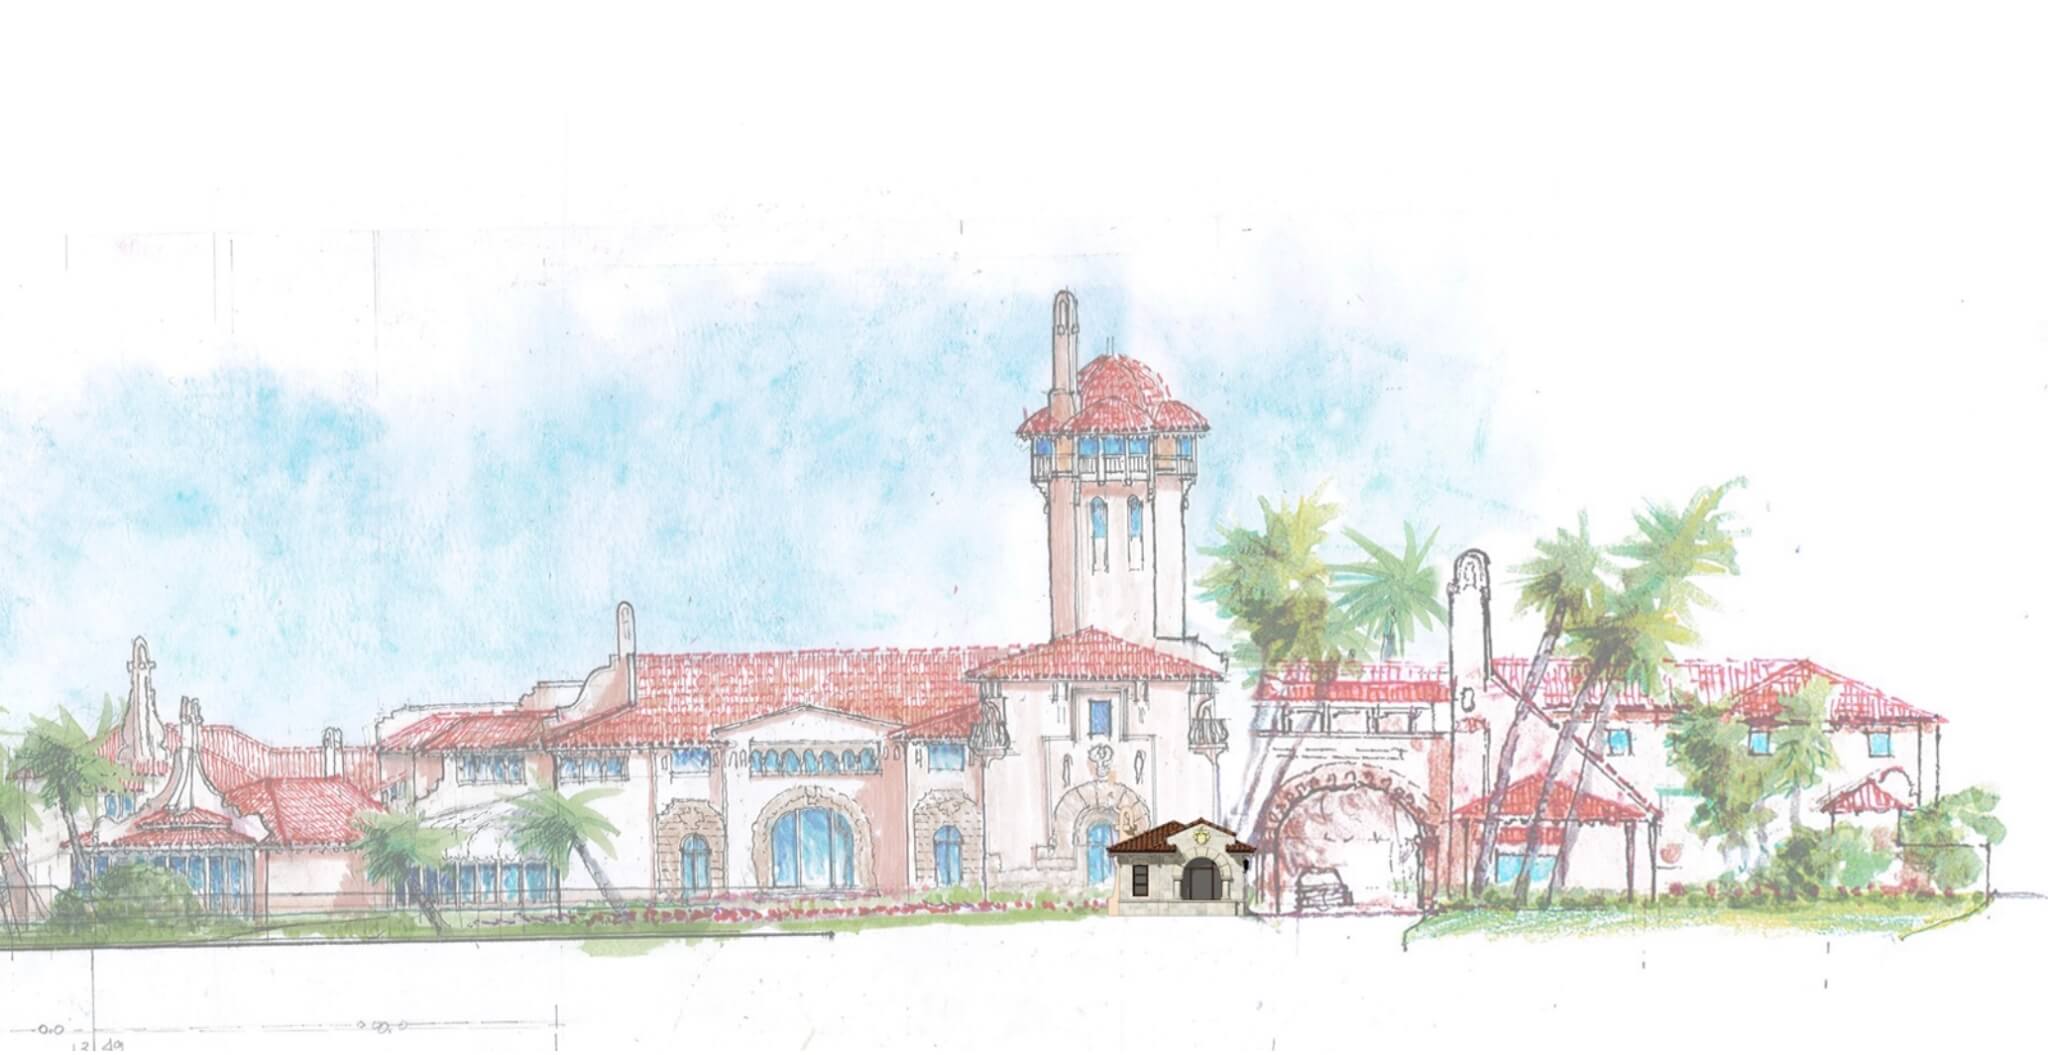 Donald Trump plans to build a guardhouse at MaraLago